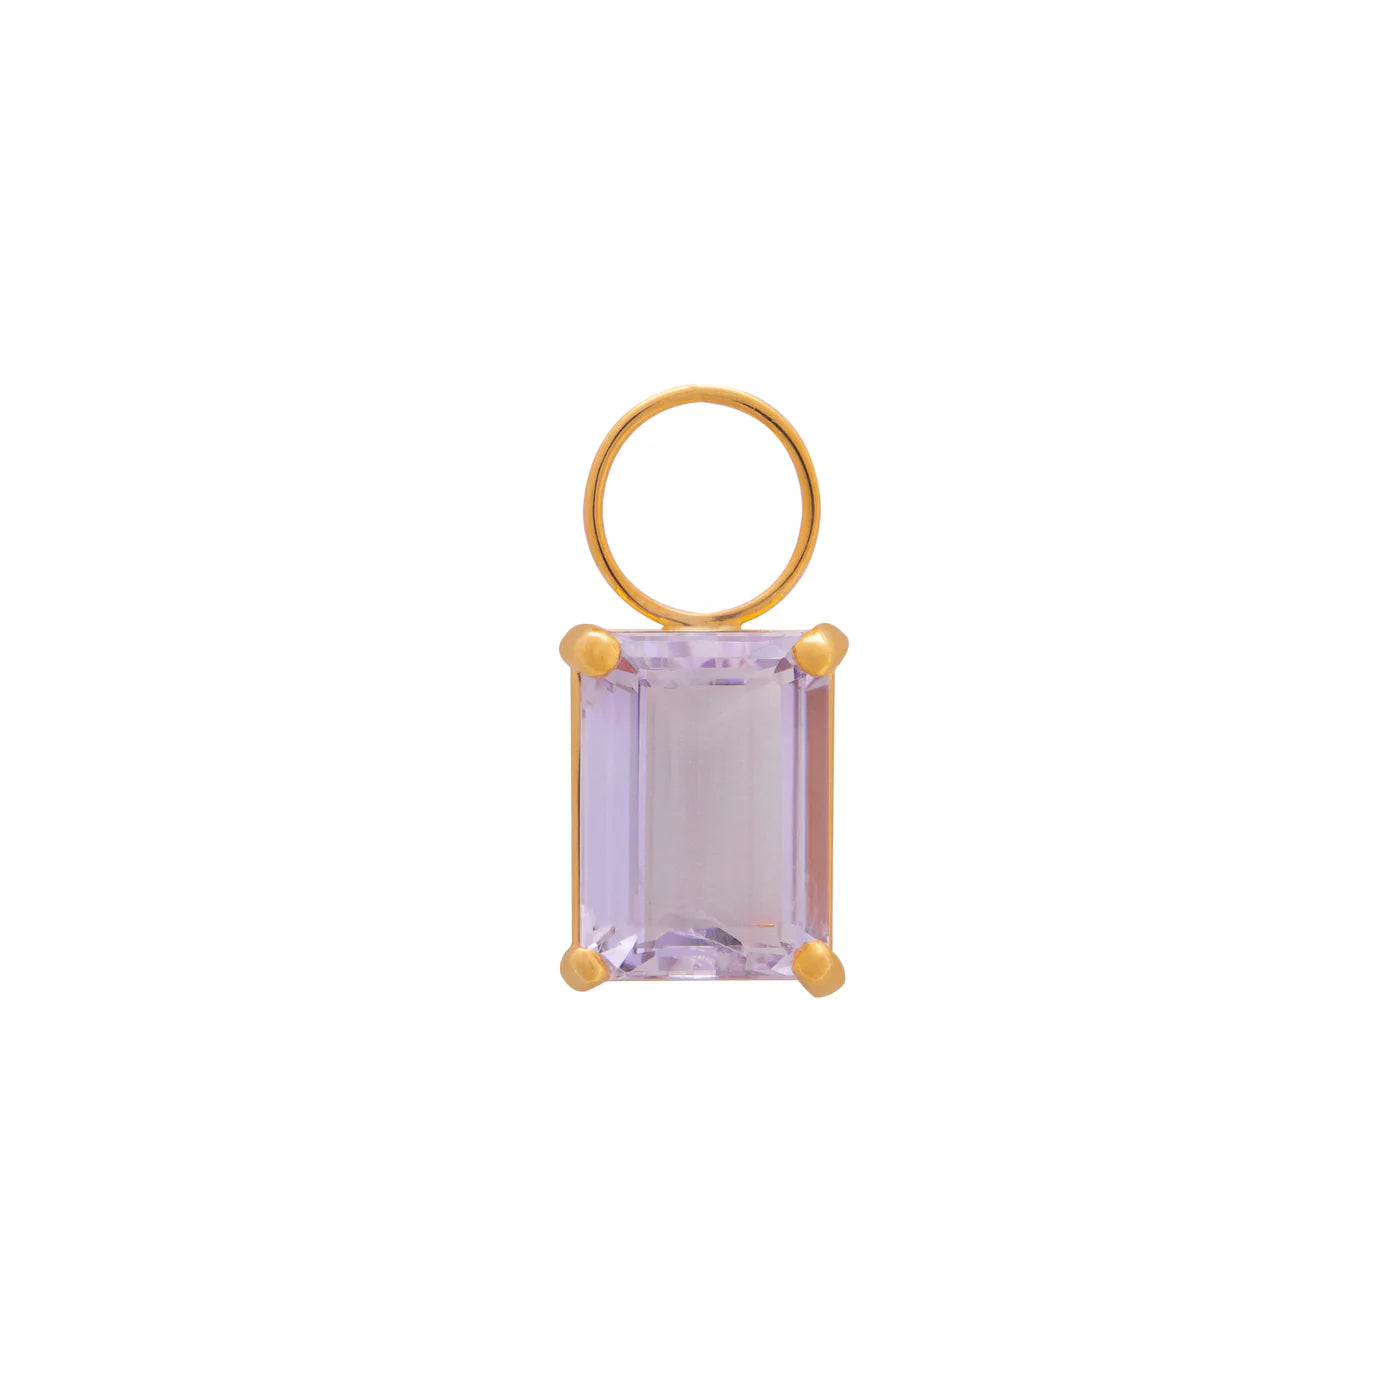 SMALL ROCK RECTANGLE PENDANT IN 18K YELLOW GOLD PLATED SILVER WITH AMETHYST